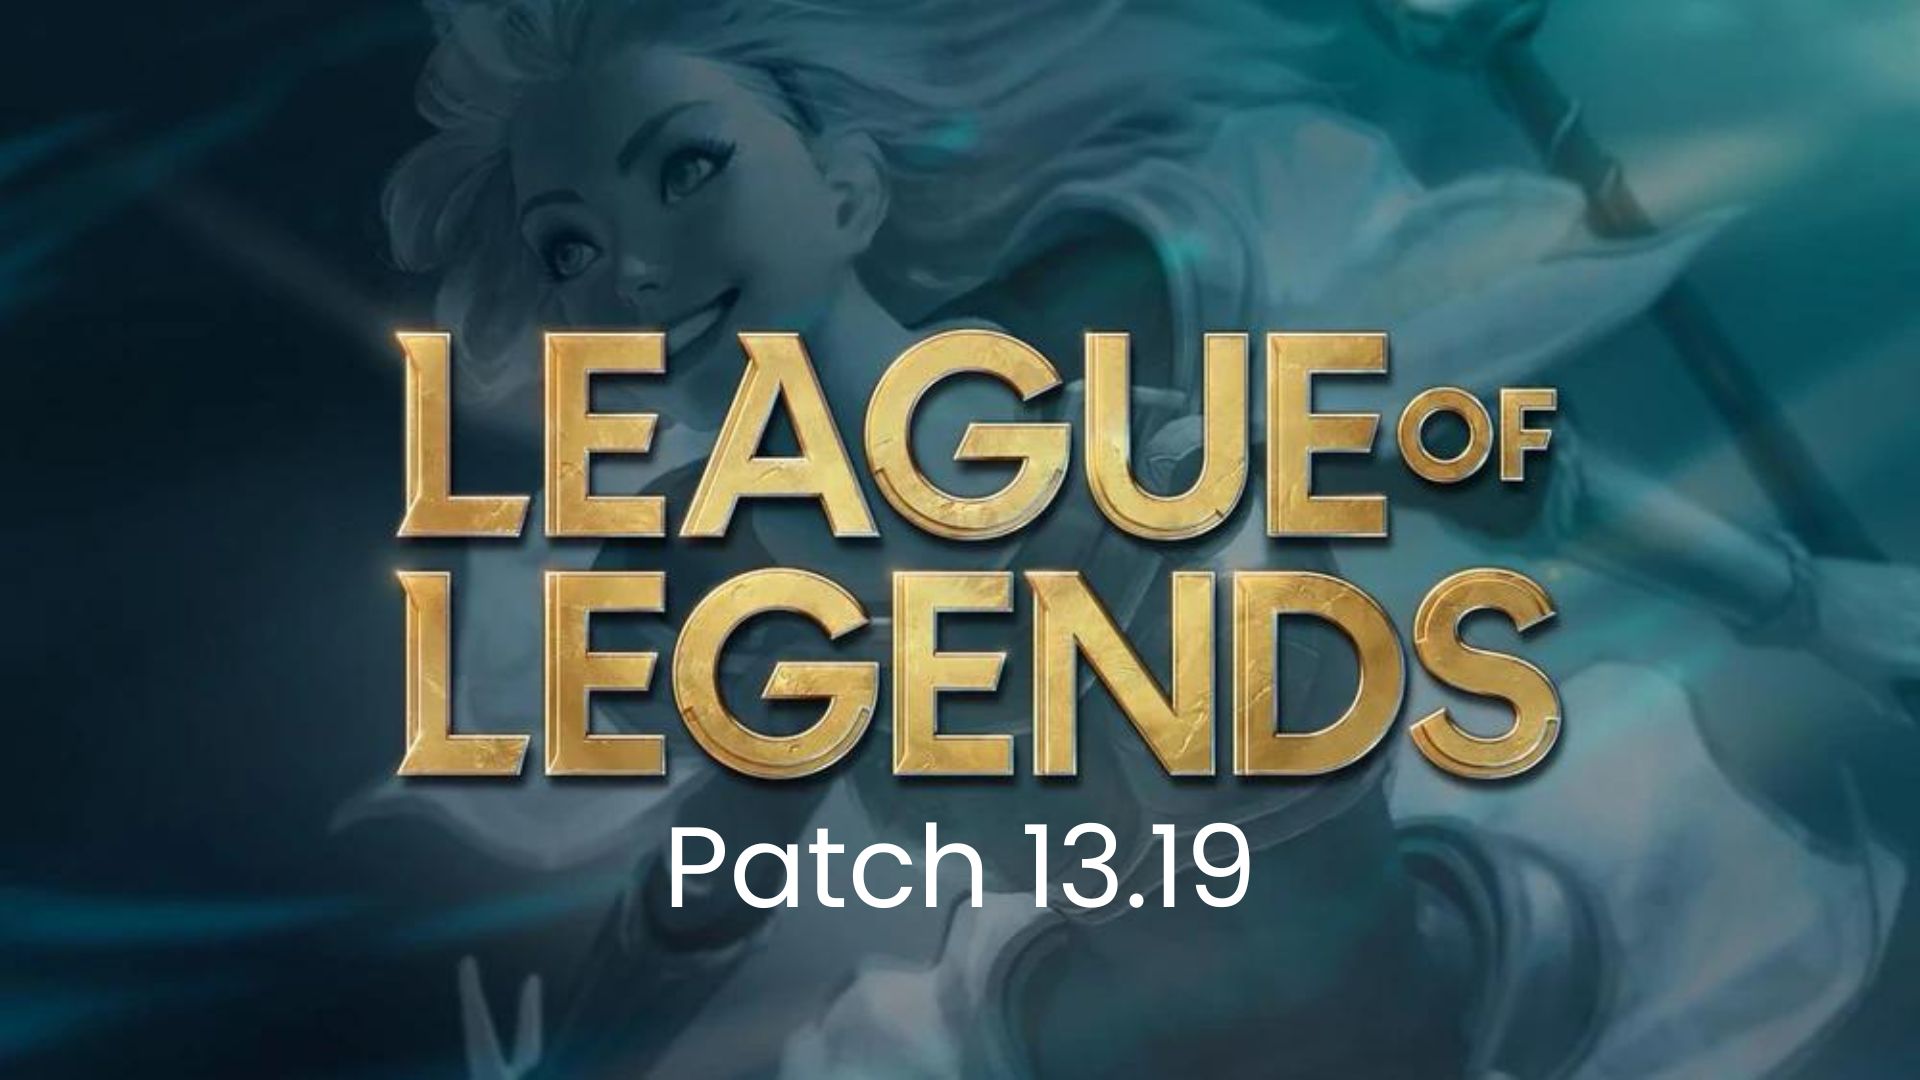 LoL News : Patch 13.1, the first of the 2023 season is here